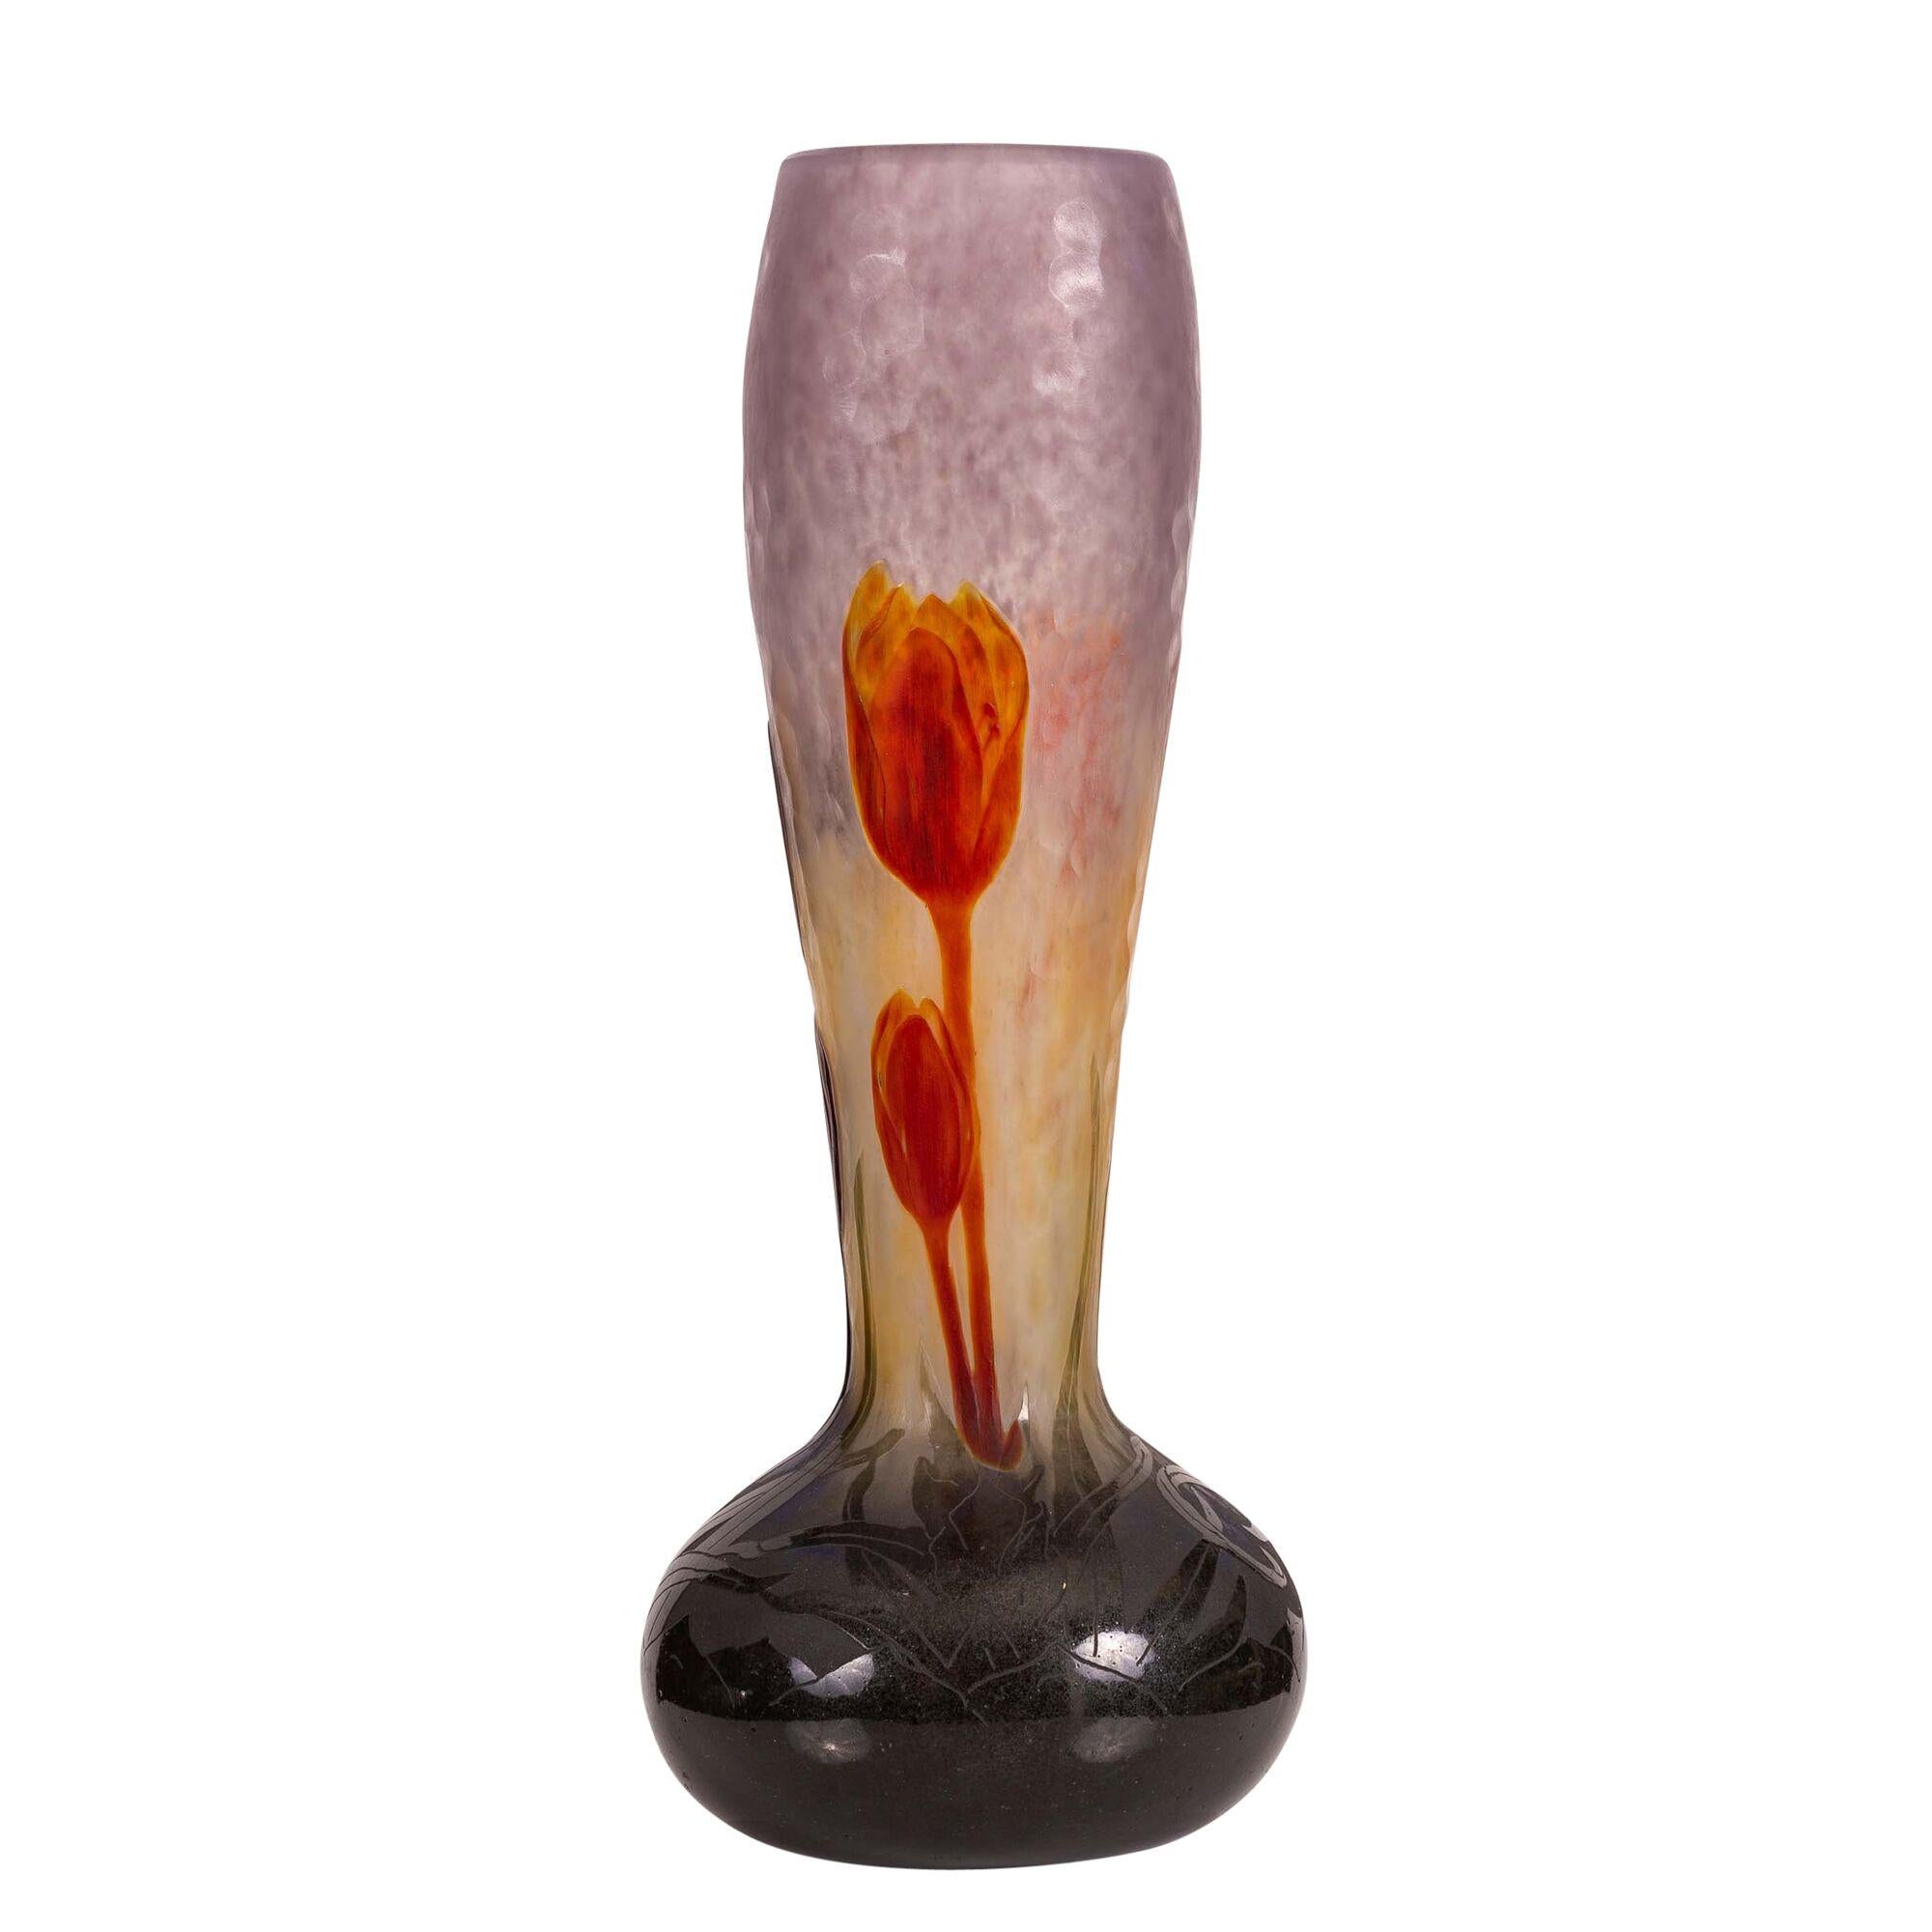 A superb and very fine Daum Nancy wheel-carved cameo and martele glass vase, with low relief applied decoration
France, circa 1910
Signed in intaglio Daum Nancy with lorraine cross 
Height 12 in. (304.8 mm.)
Width 4 1/2 in. (114.3